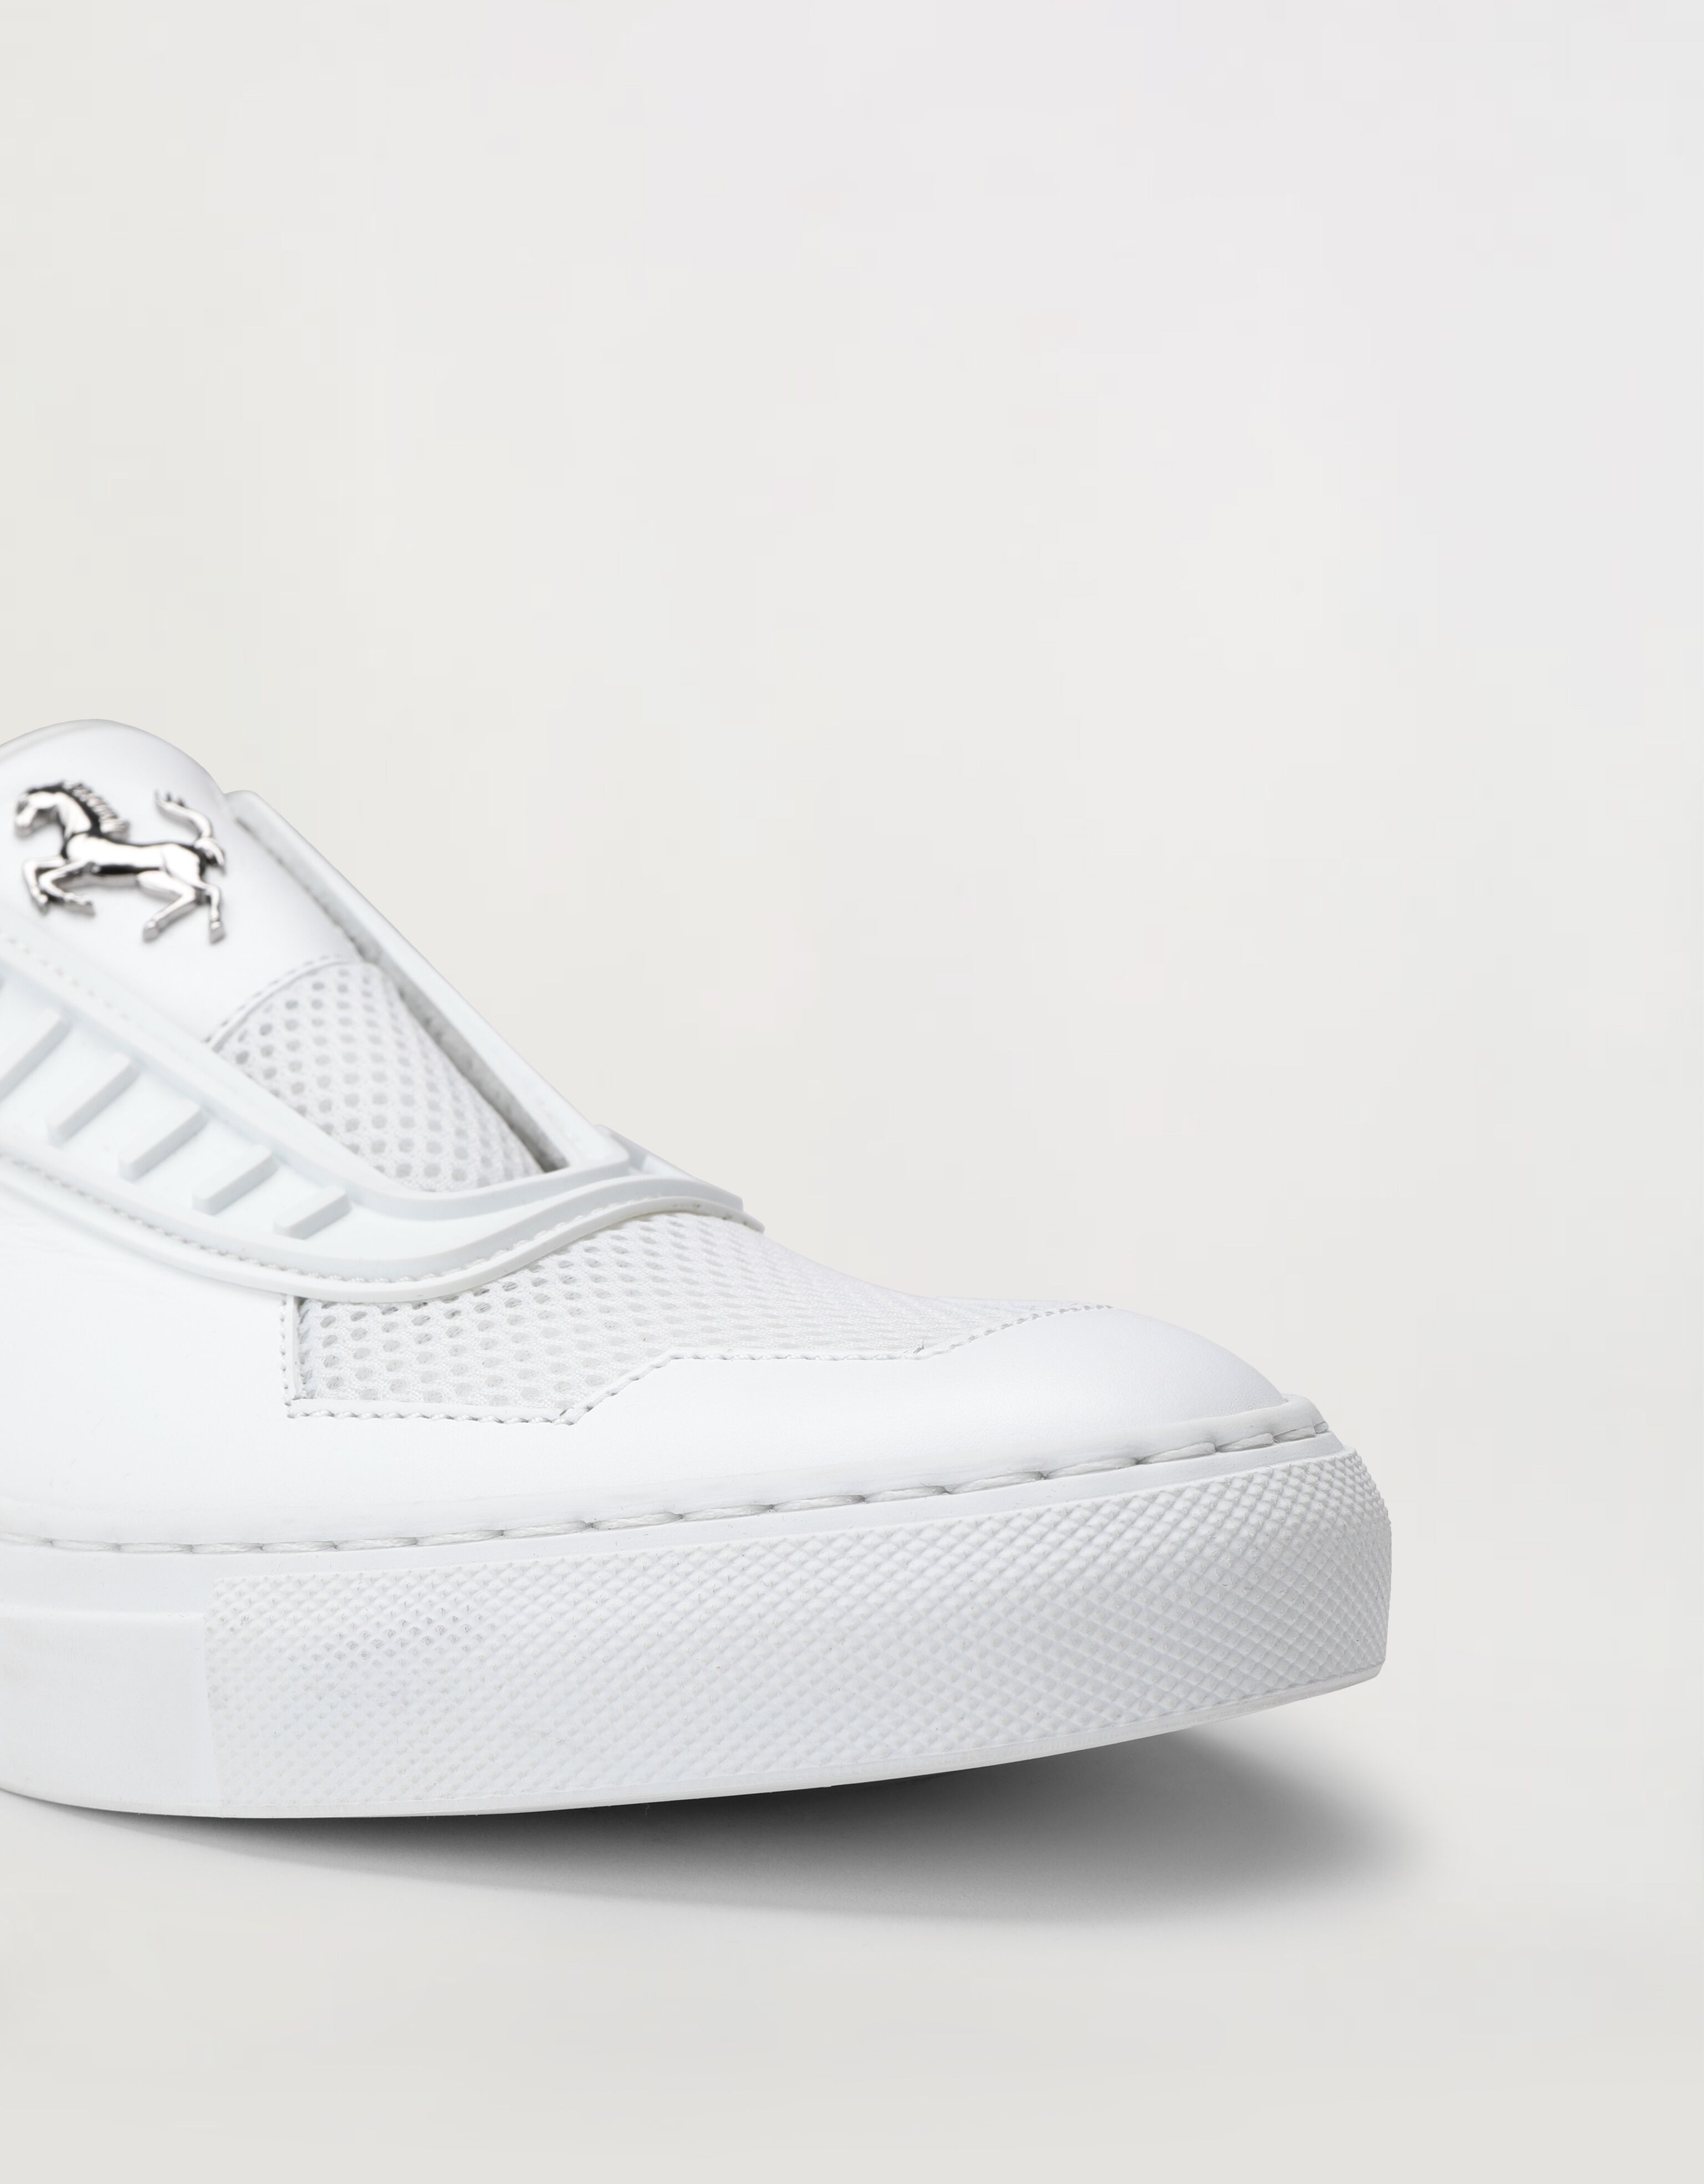 Ferrari Women's slip-on leather trainers featuring the Prancing Horse Optical White 47104f